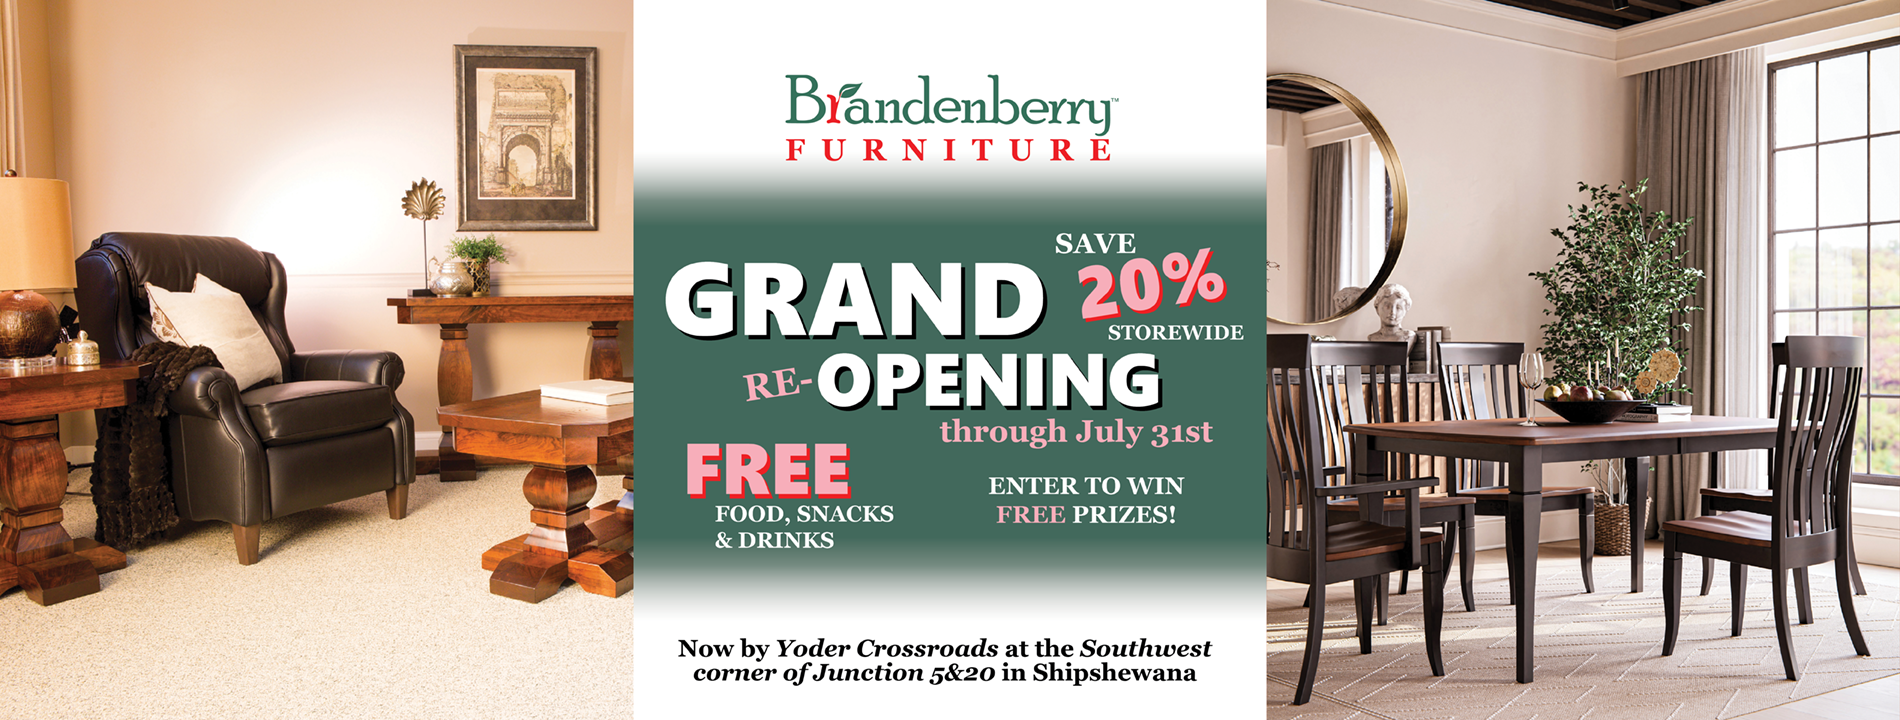 Grand re-Opening Sale at Brandenberry Amish Furniture